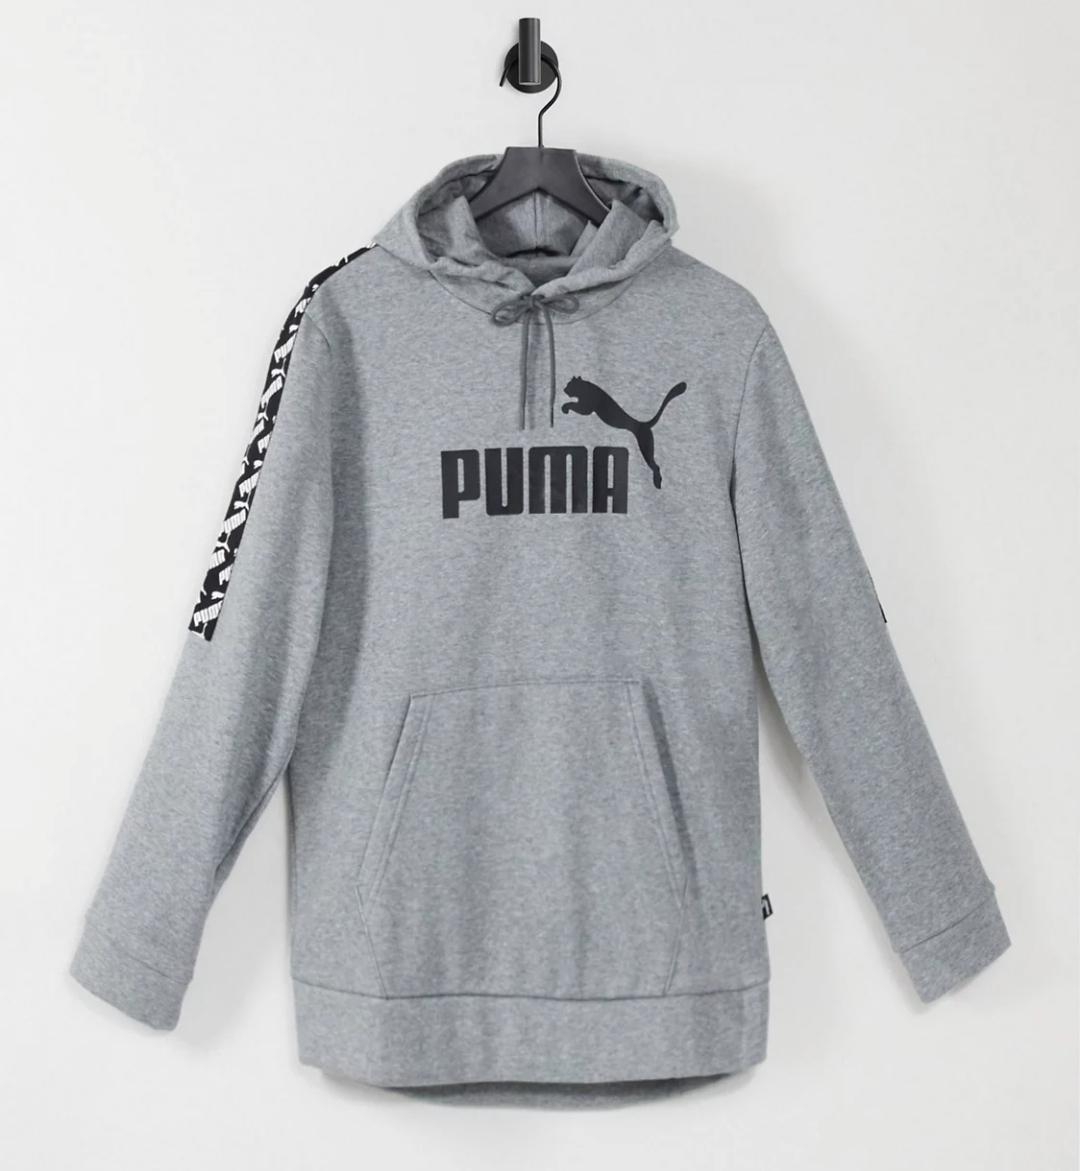 Puma Amplified Hoodie Now £17.64 with code Delivery is £4 or Free with ...